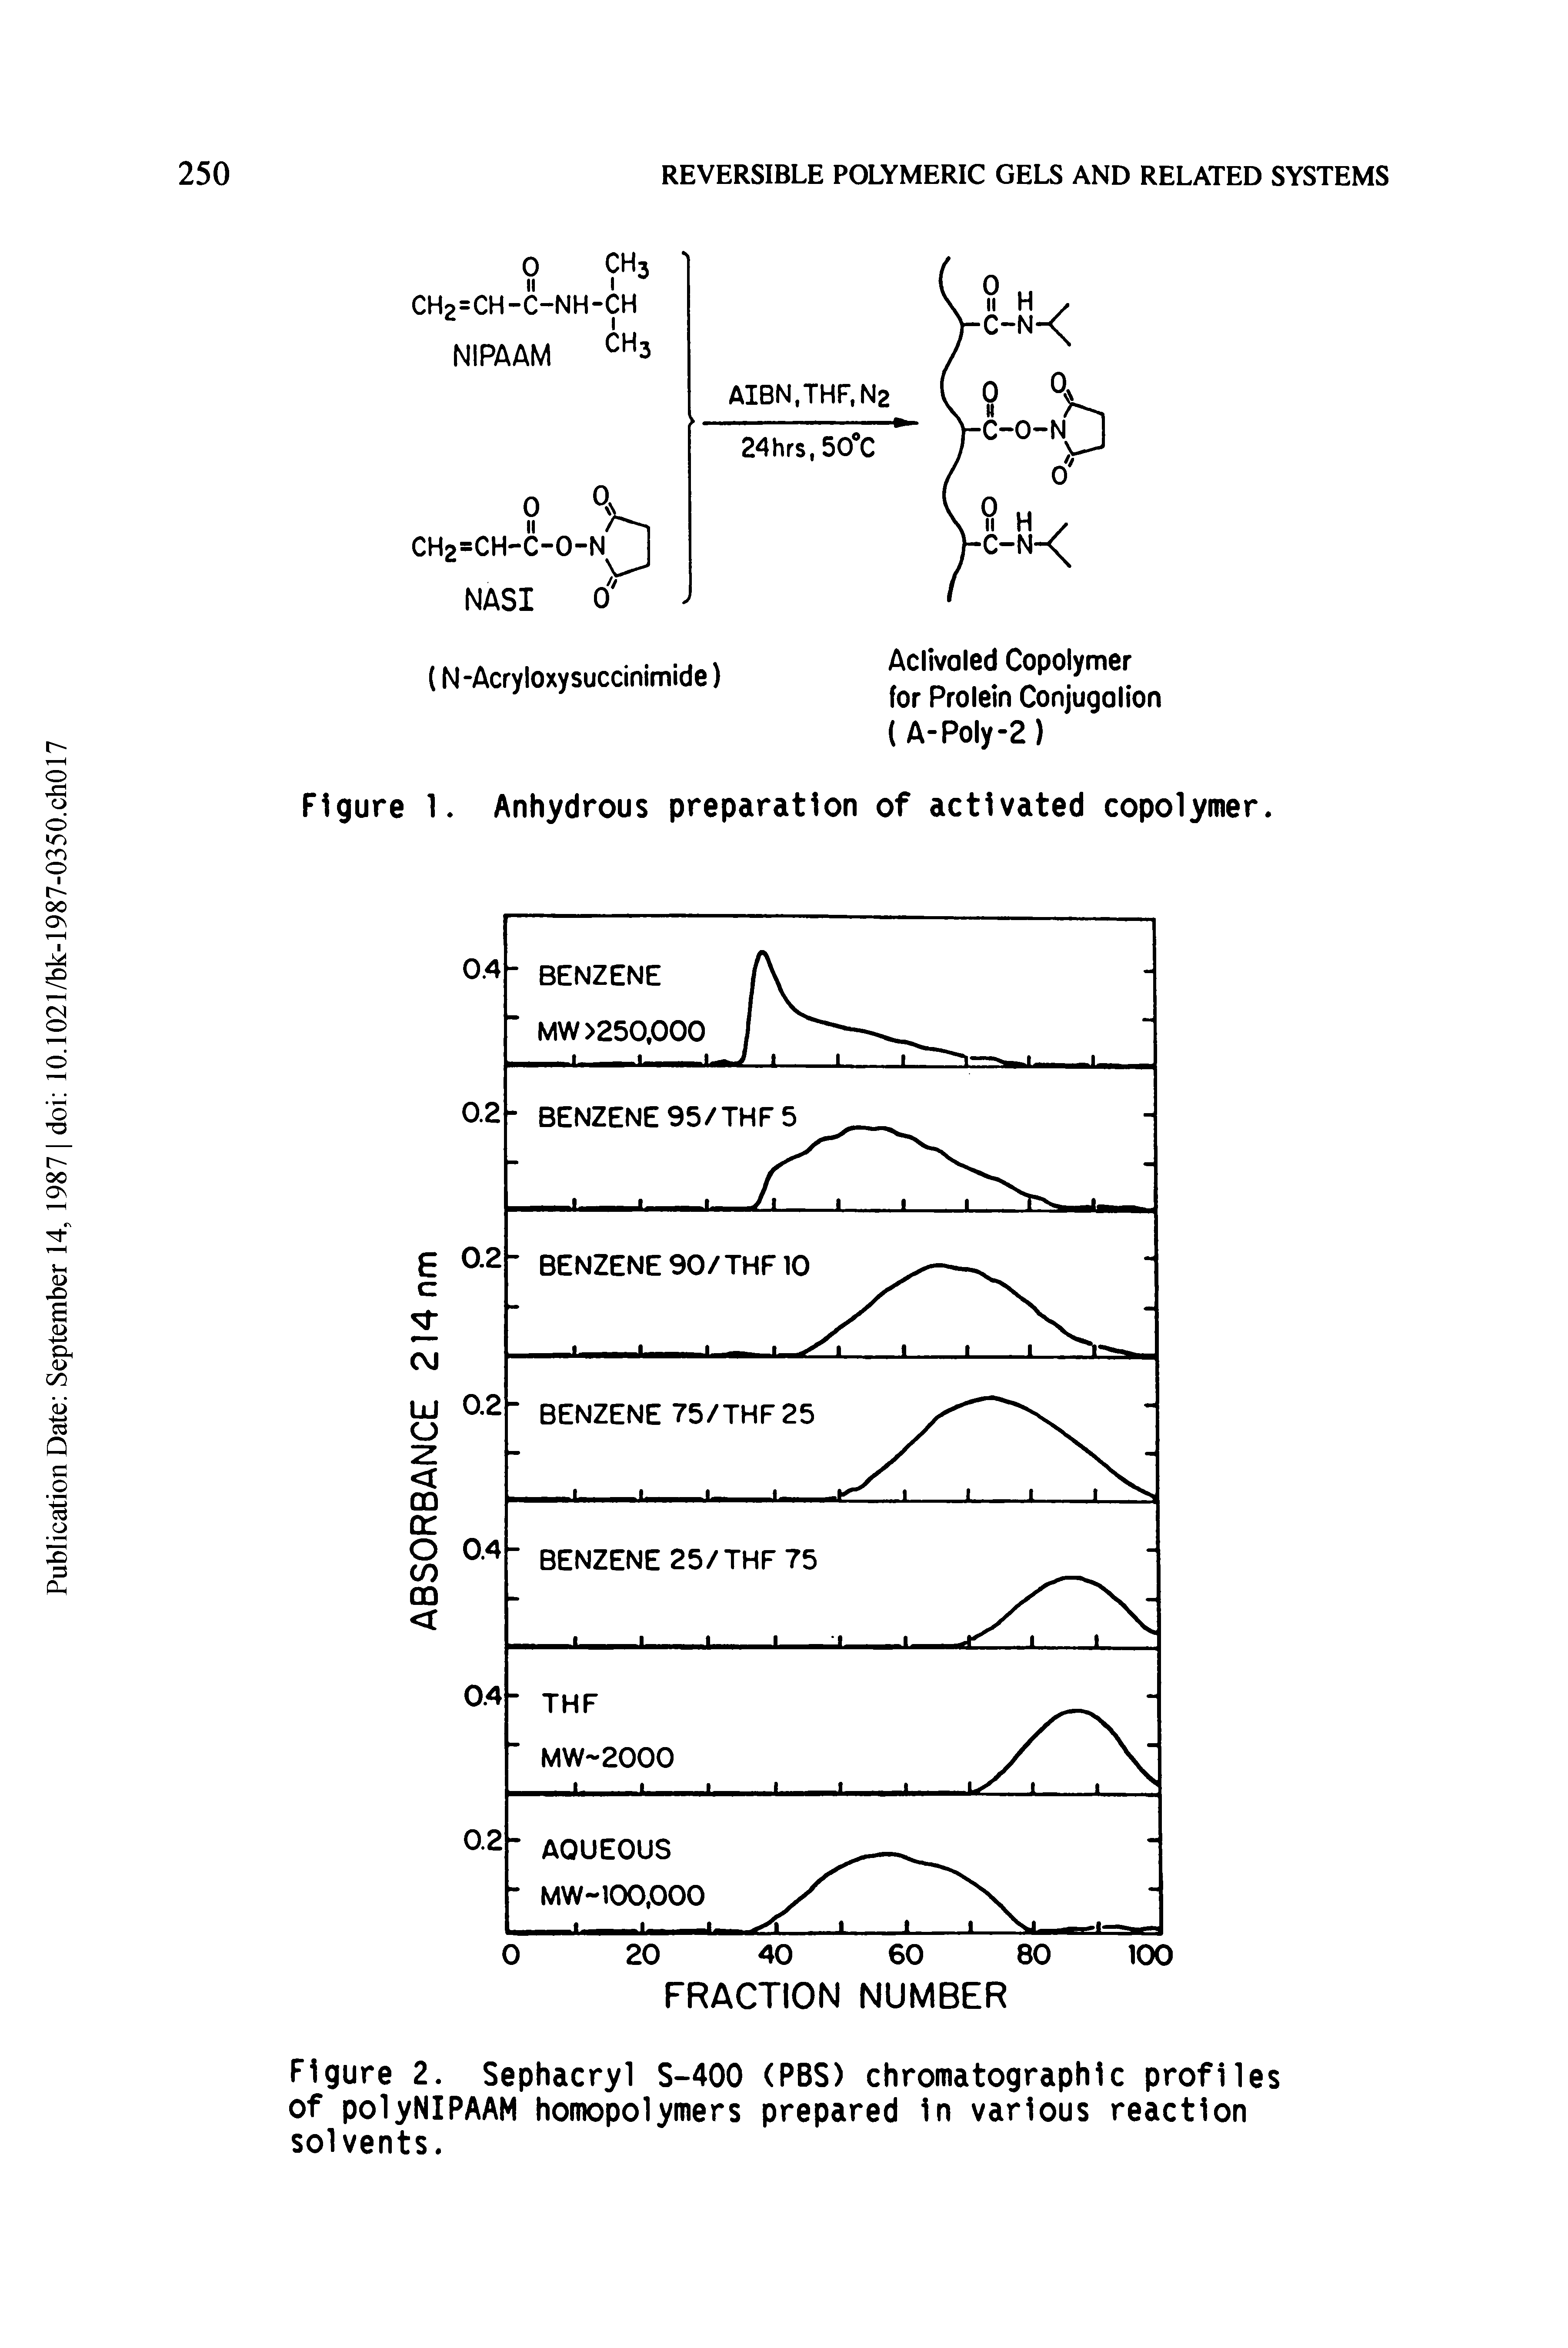 Figure 2. Sephacryl S-400 (PBS) chromatographic profiles of polyNIPAAM homopolymers prepared in various reaction solvents.